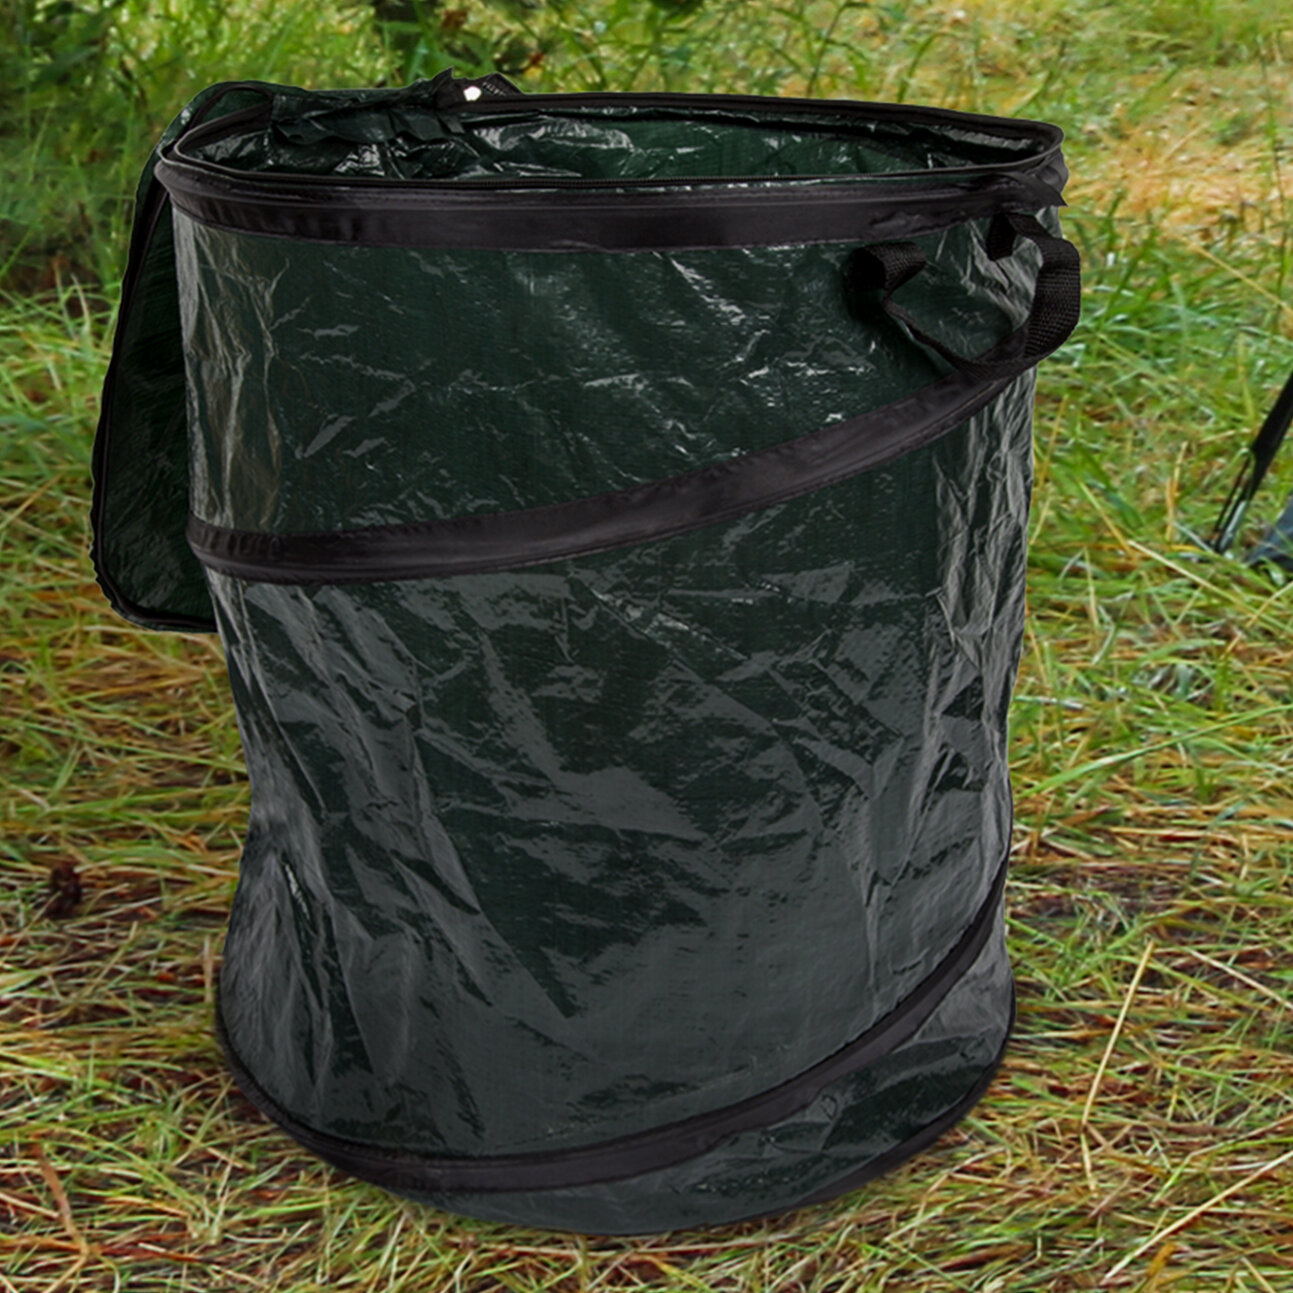 Expandable Trash Bag Holder - 13 Gallon – Camping, Tailgates, RV, Outdoor  Party Garbage Bag Holder- Outdoor Trash Can - Black